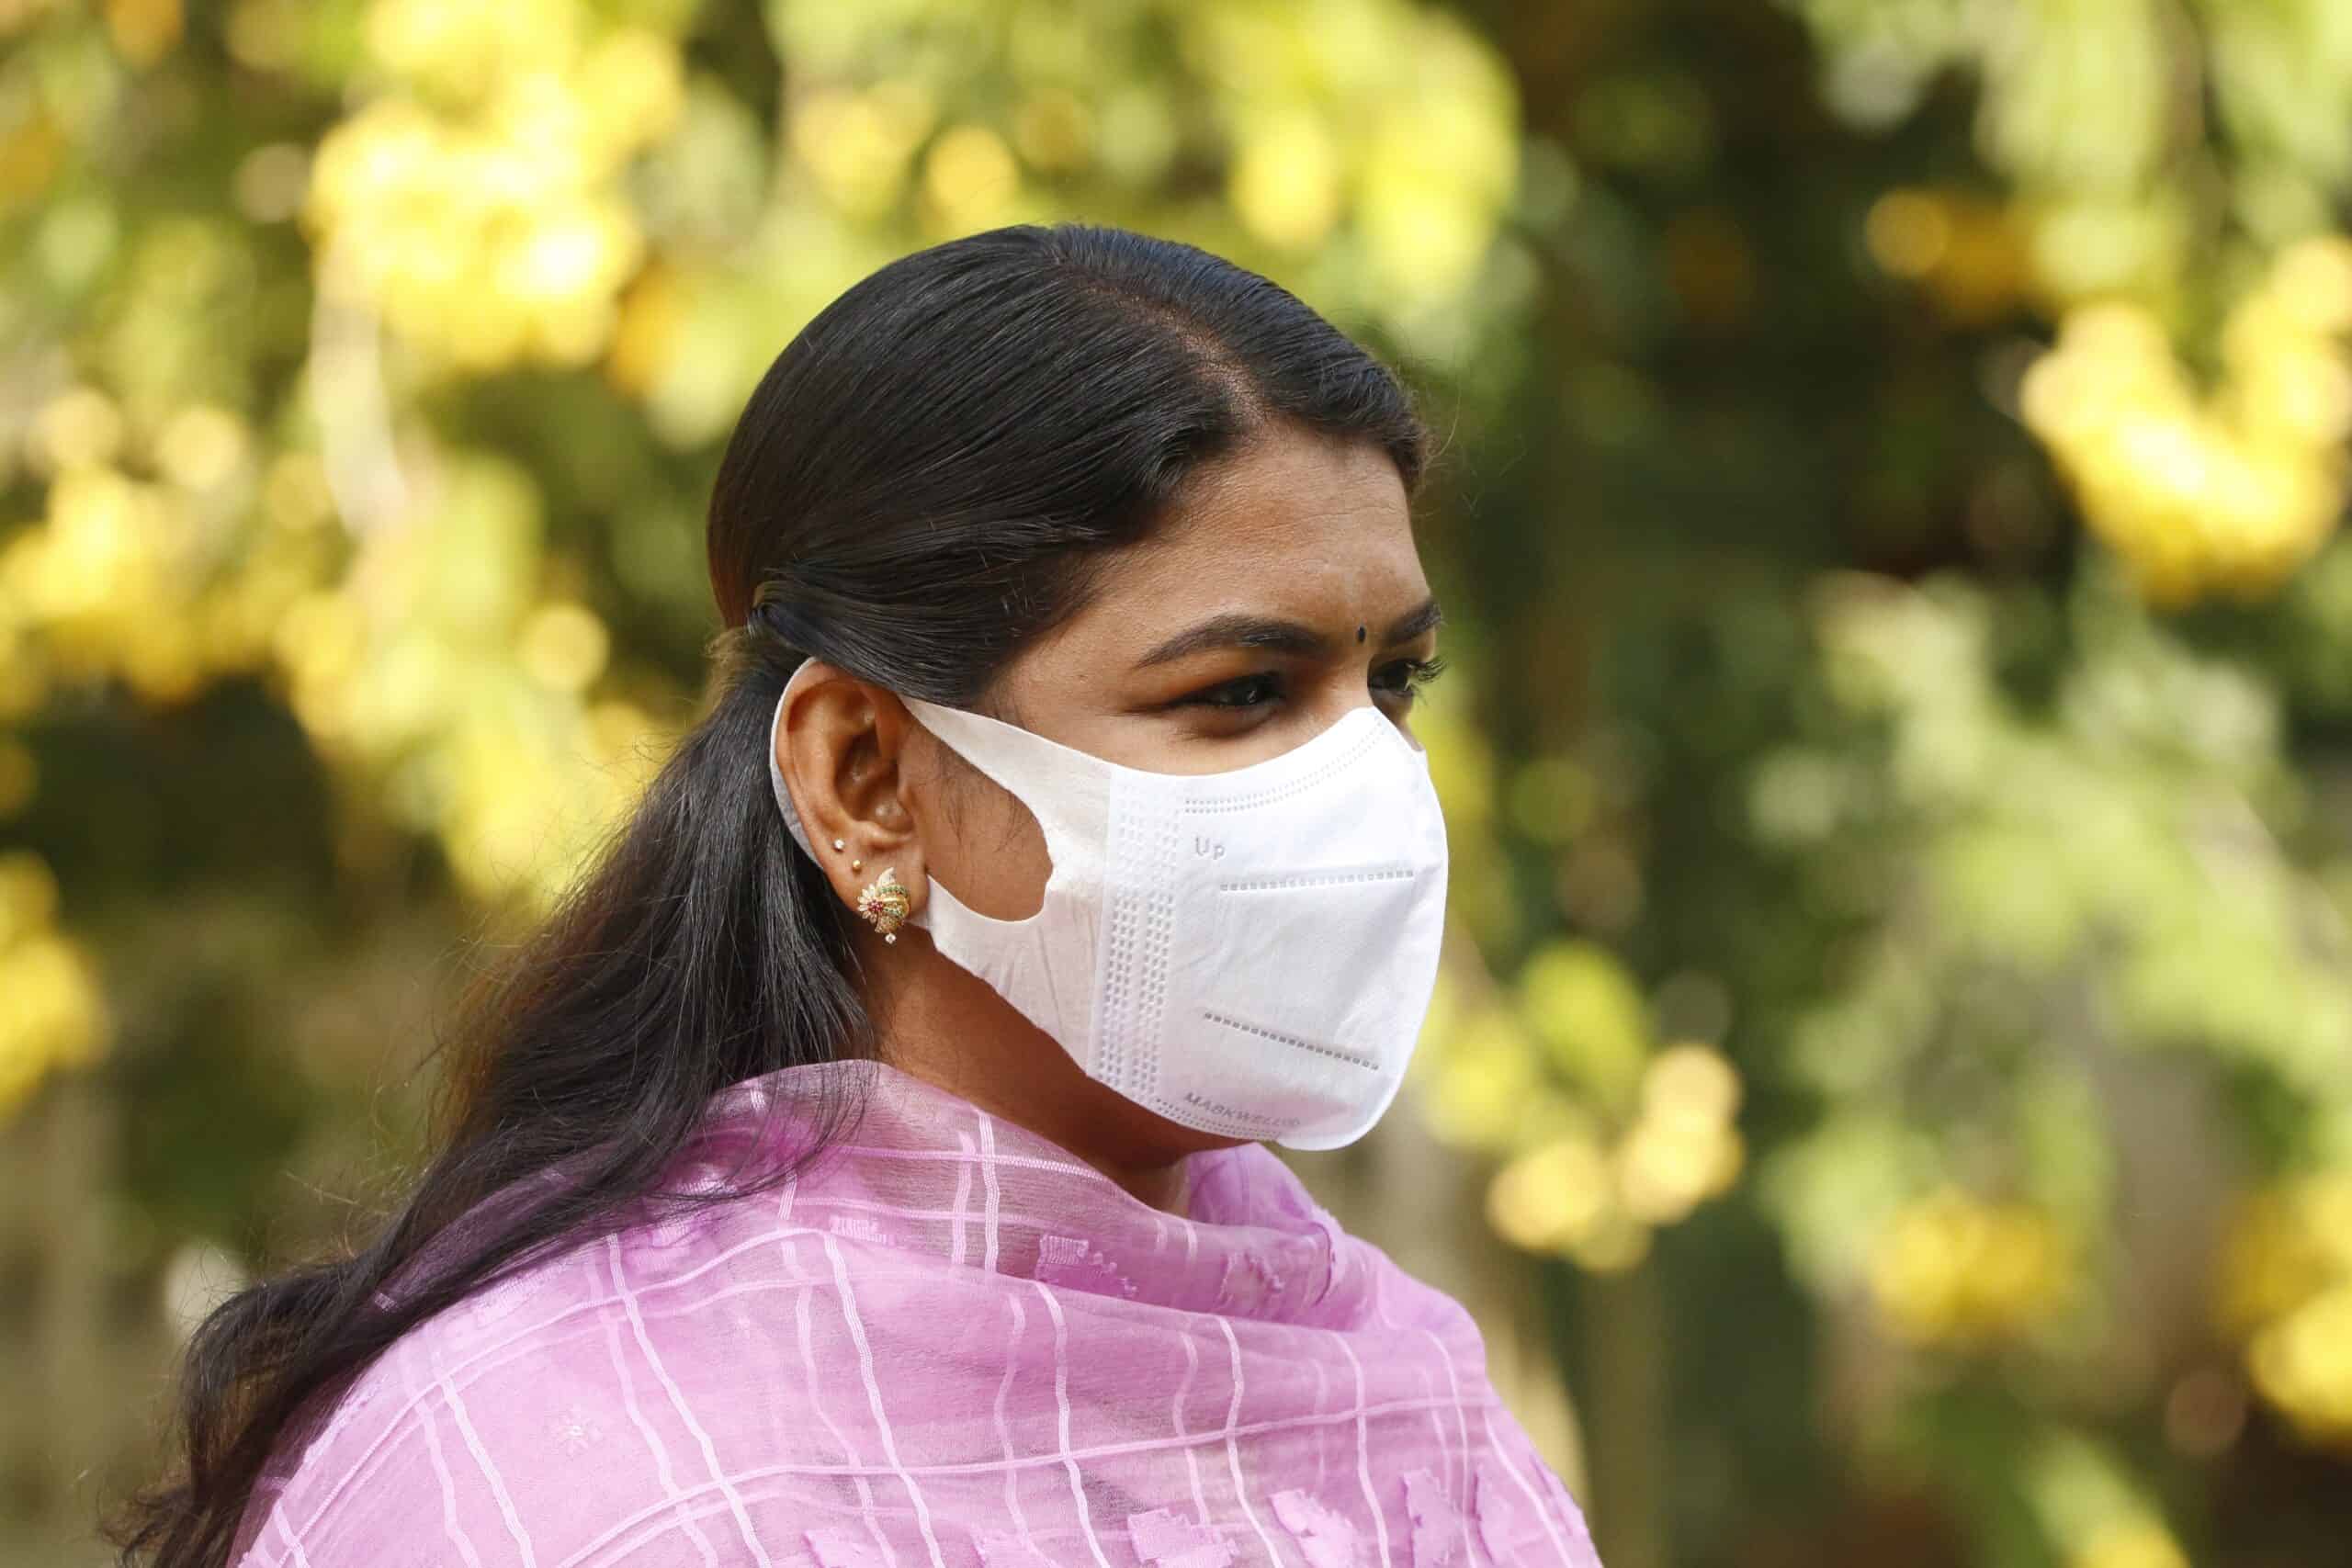 Woman in India wearing mask to protect against COVID-19.